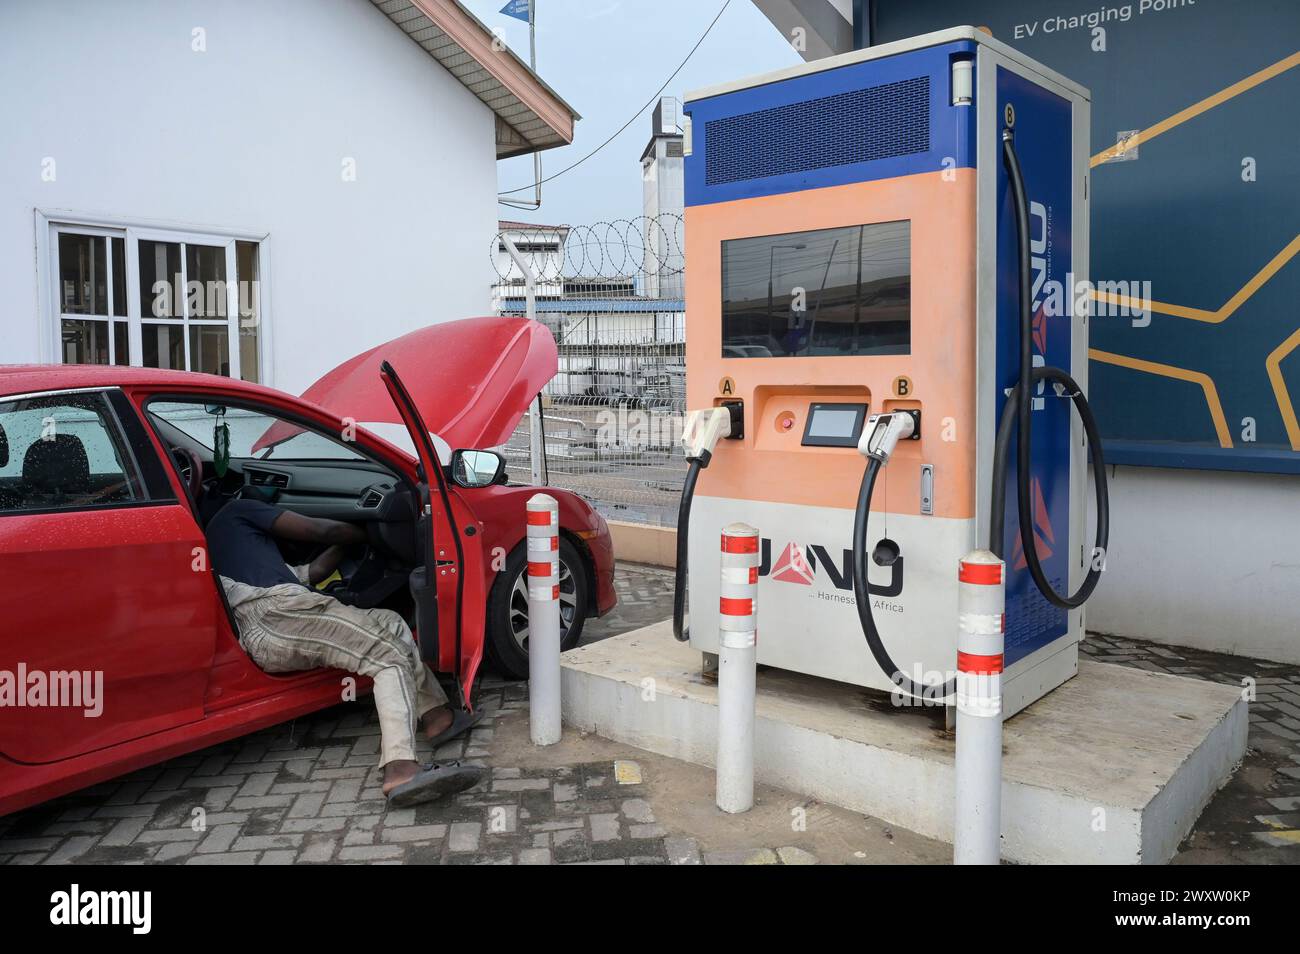 GHANA, Accra, electric mobility, IJANU service and quick charging station for electric cars, quick charger station with Tesla plug, left / GHANA, Accra, E-Mobilität, IJANU Service und Ladestation für E-Autos, Quick-charger Stock Photo